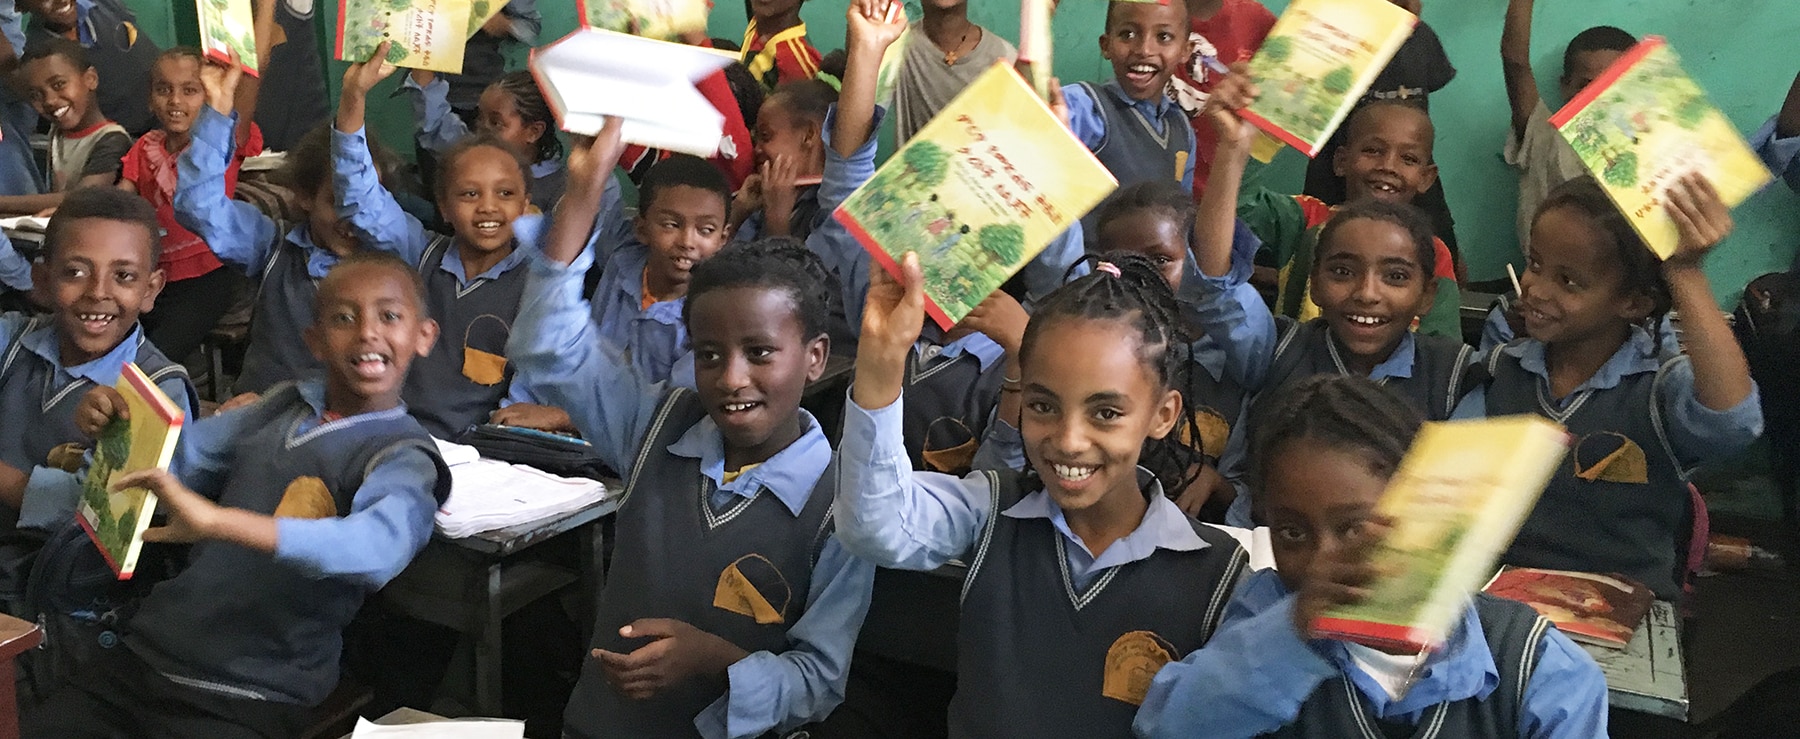 Ethiopia Classroom Of Children With Bible Storybooks